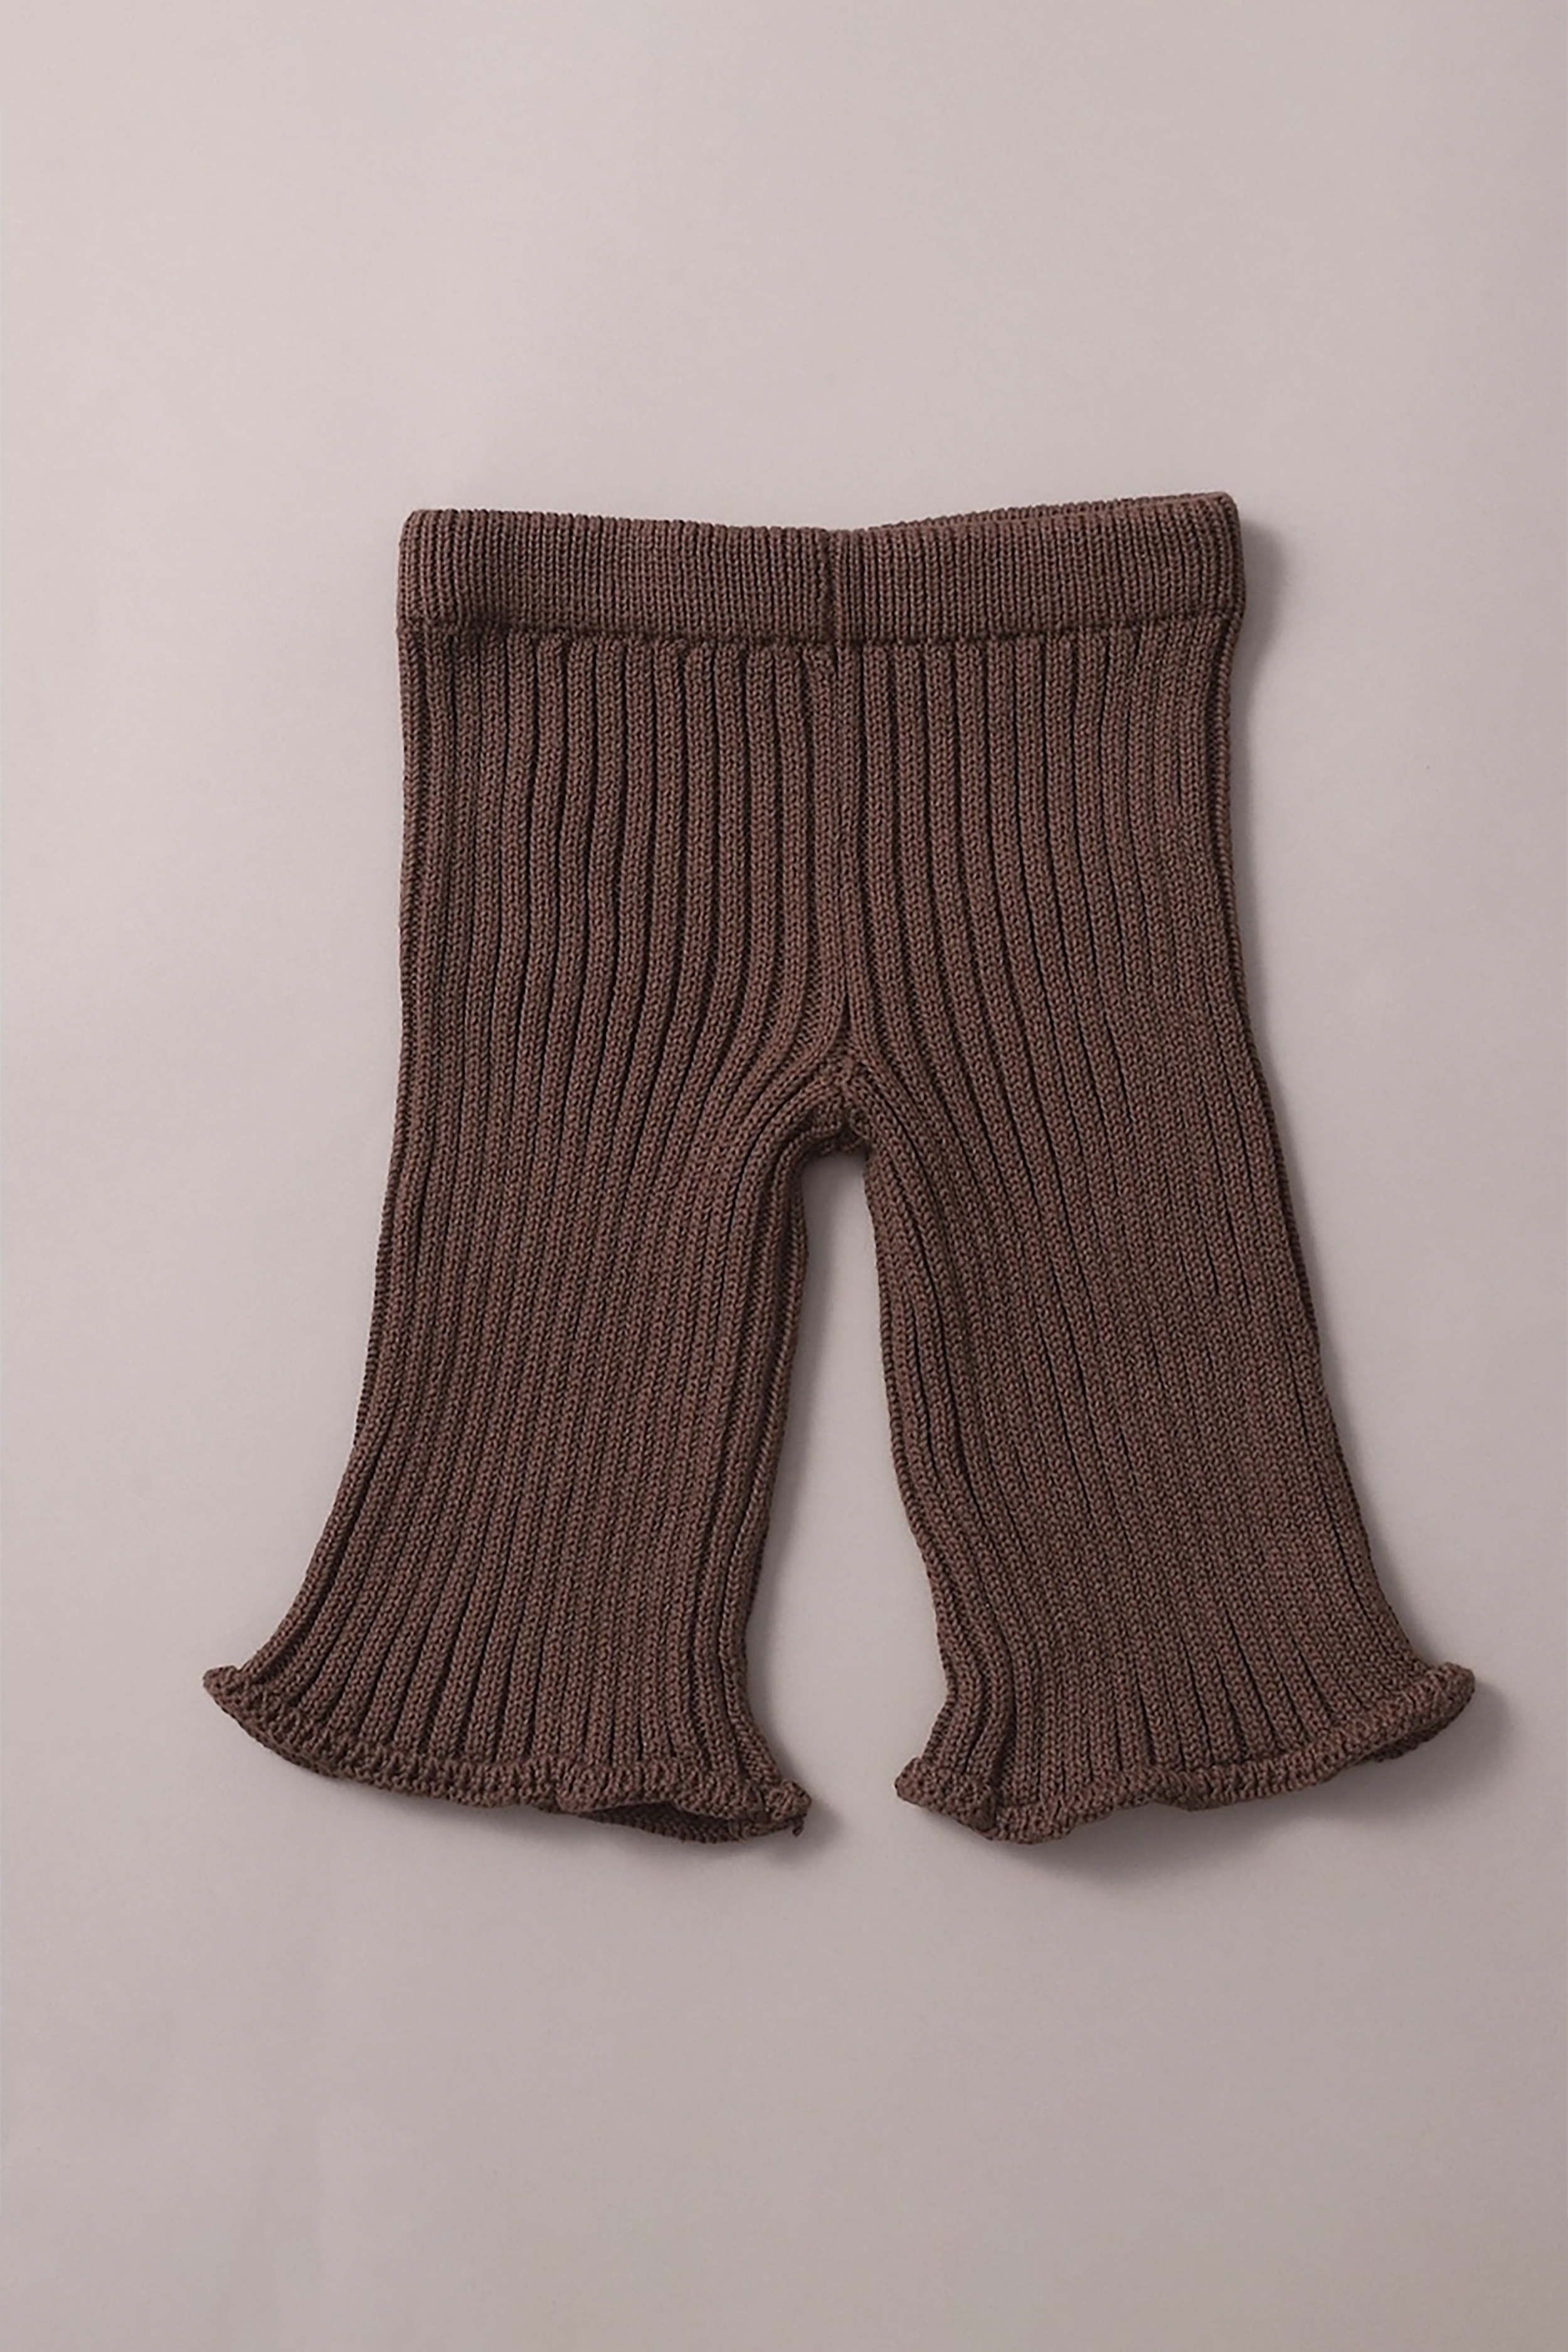 Knit Set in Chocolate